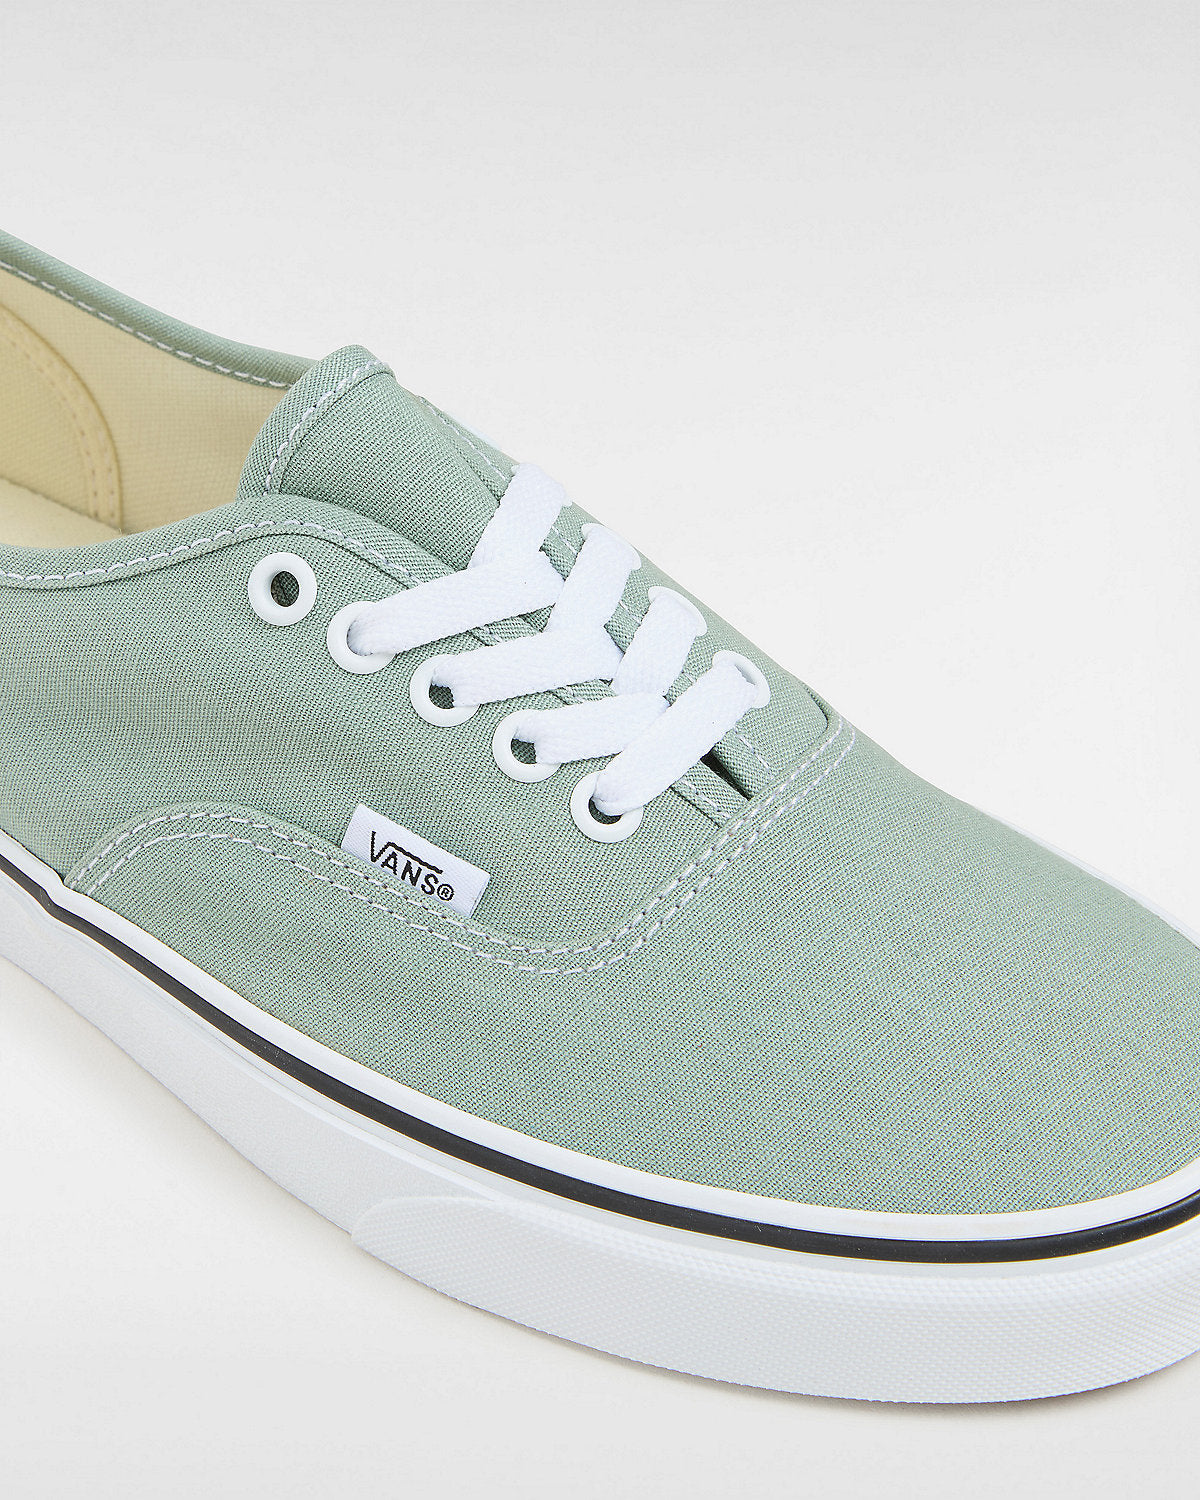 VANS Unisex Authentic Color Theory Trainers - Iceberg Green